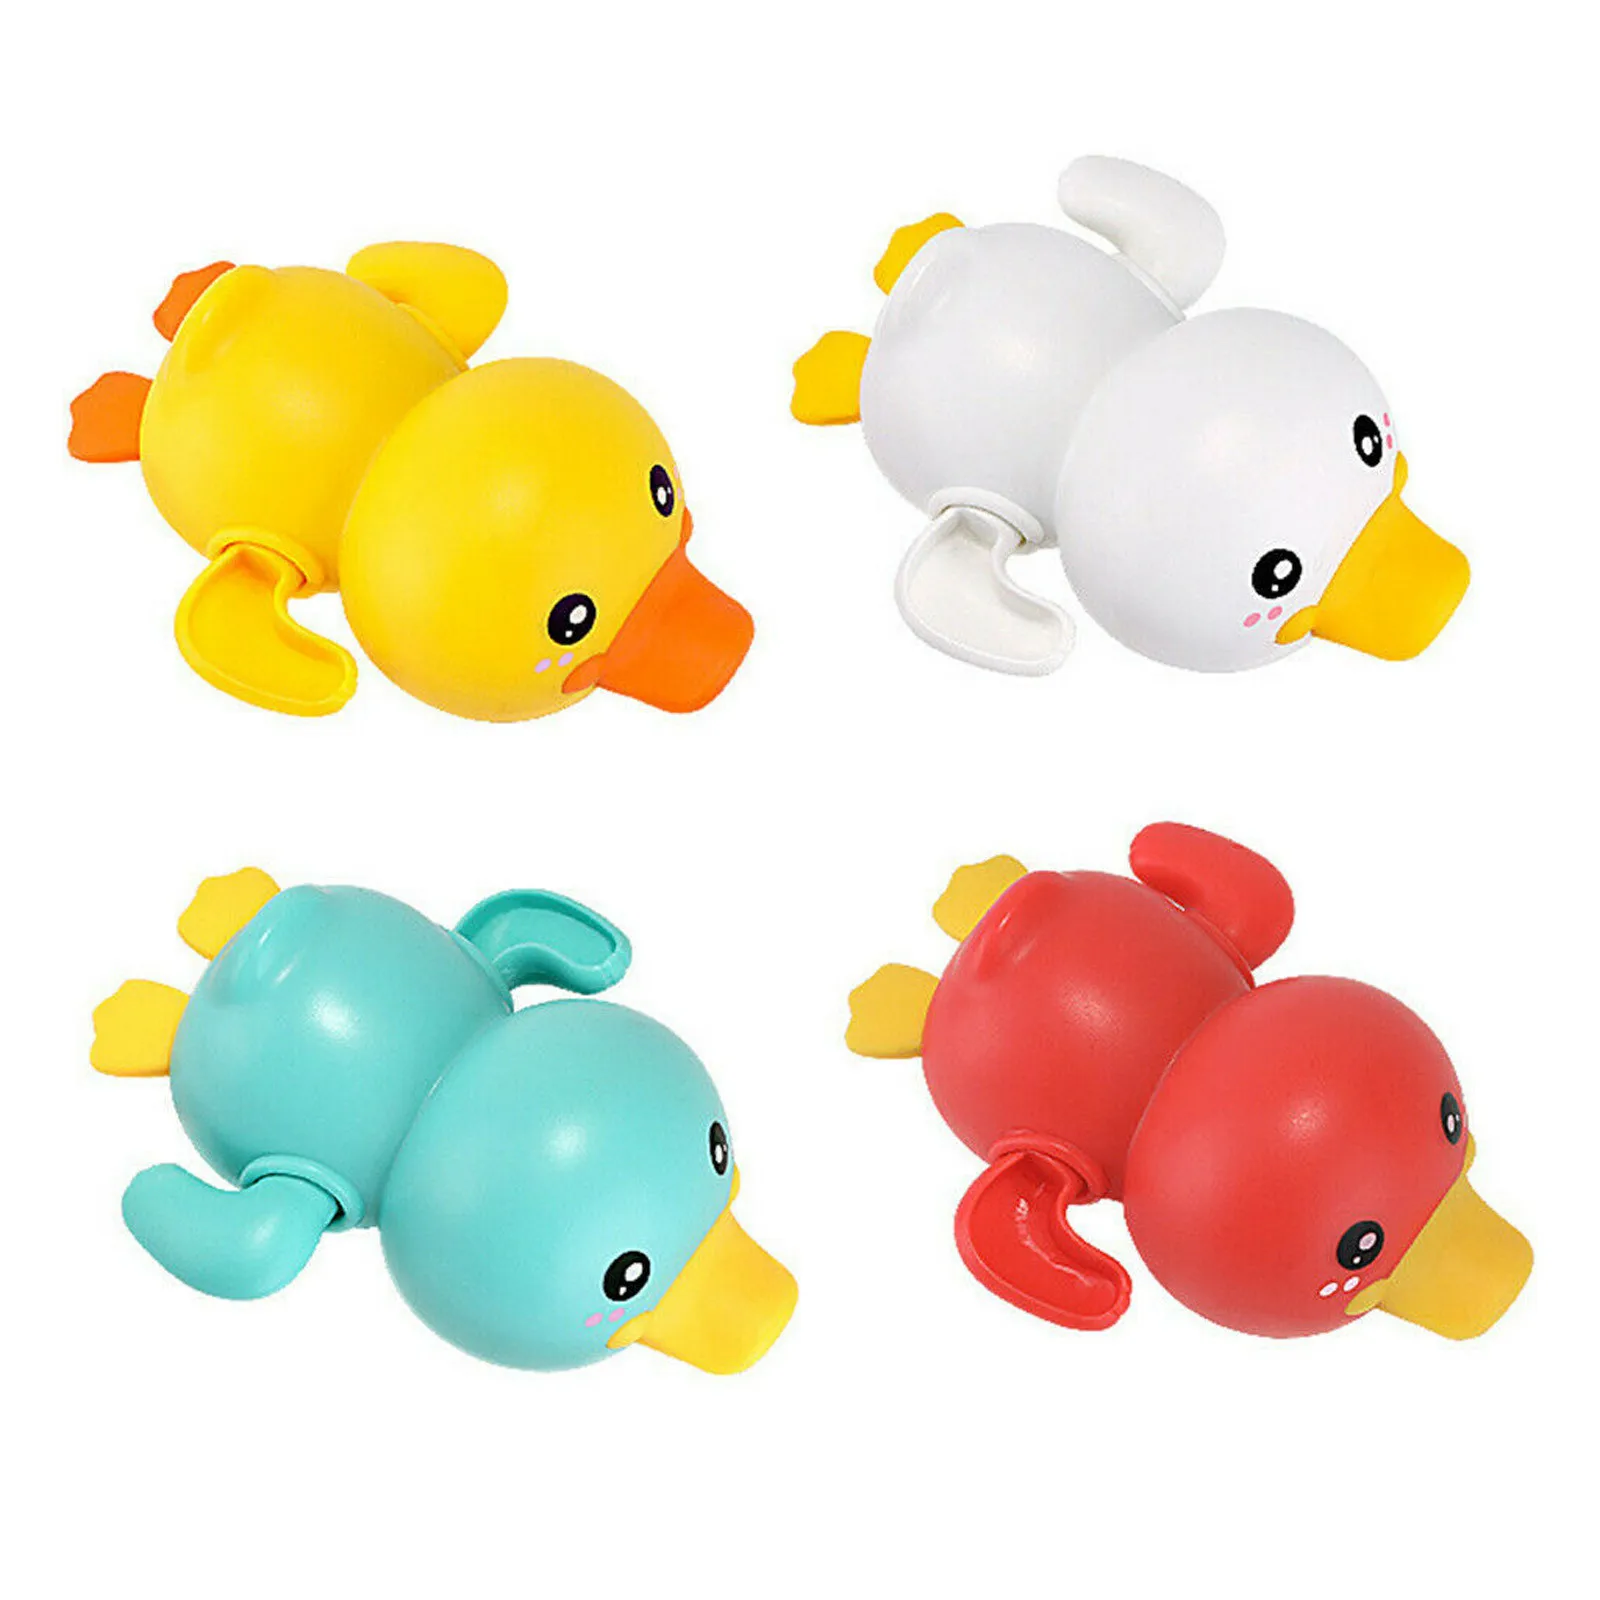 best Baby & Toddler Toys Baby Bath Toys Bathing Ducks Cartoon Animal Whale Crab Swimming Pool Classic Chain Clockwork Water Toy For Infant 0 24 Months top Baby & Toddler Toys